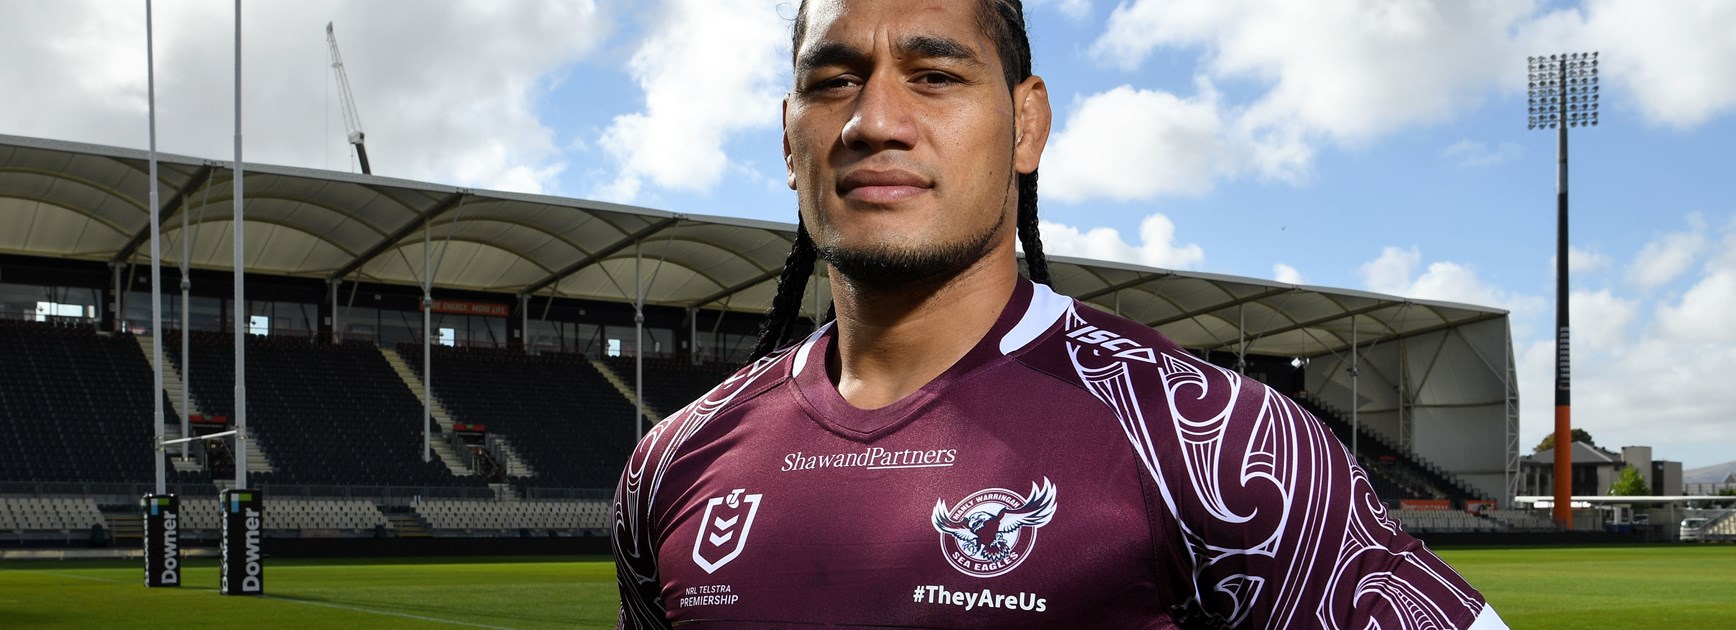 TheyAreUs: Warriors, Sea Eagles jerseys carry message of unity in Christchurch